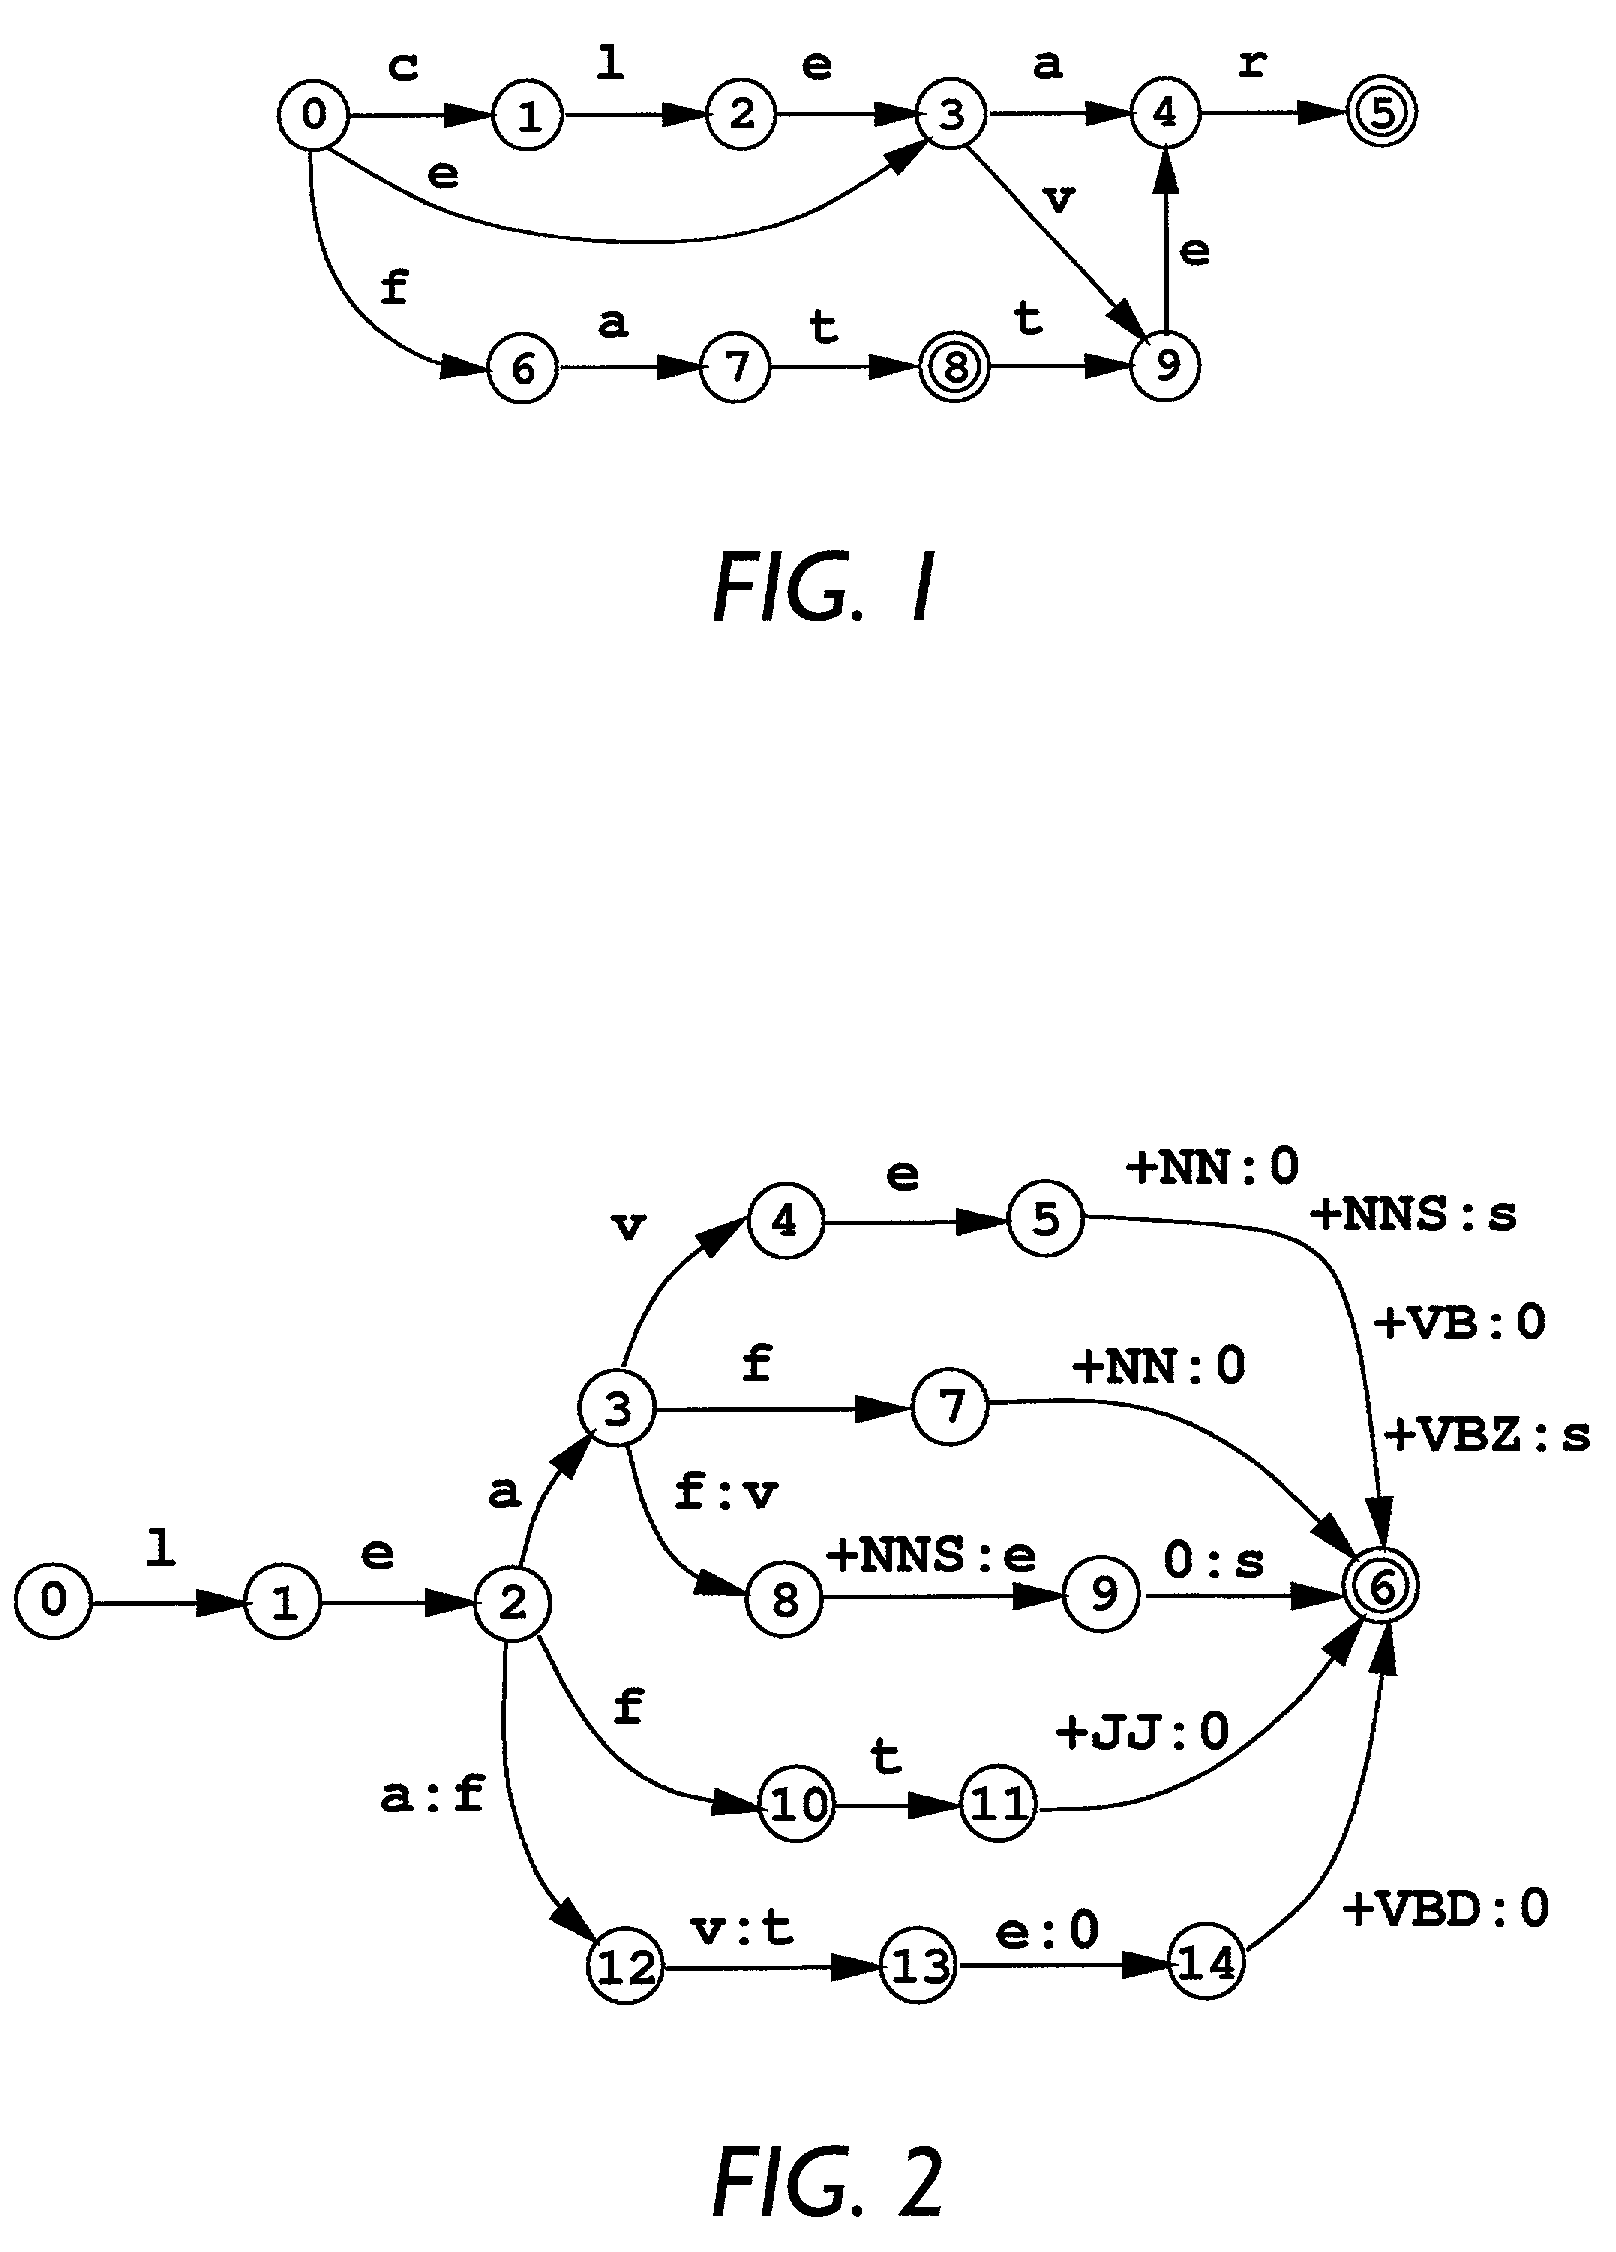 Method and apparatus for aligning ambiguity in finite state transducers